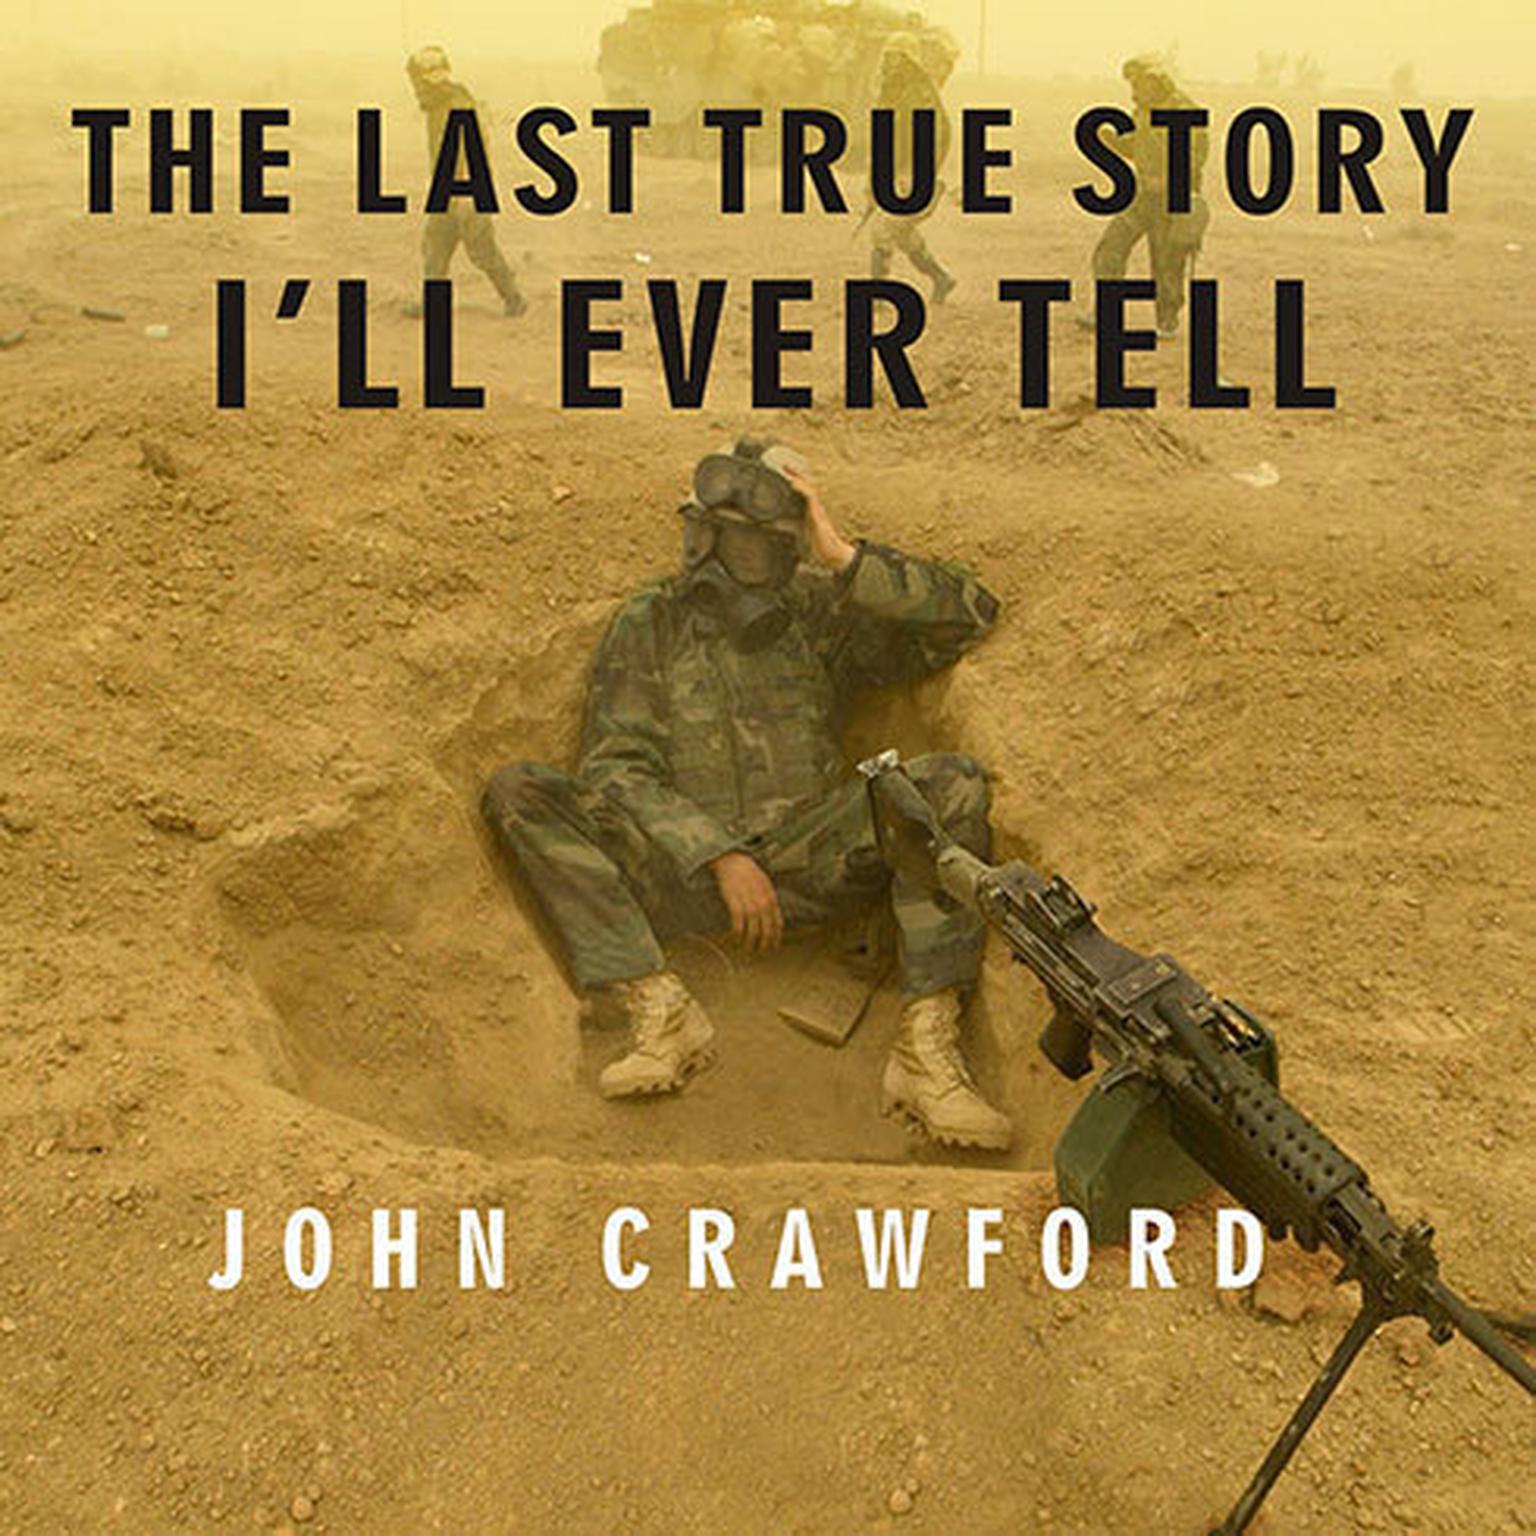 The Last True Story Ill Ever Tell: An Accidental Soldiers Account of the War in Iraq Audiobook, by John Crawford